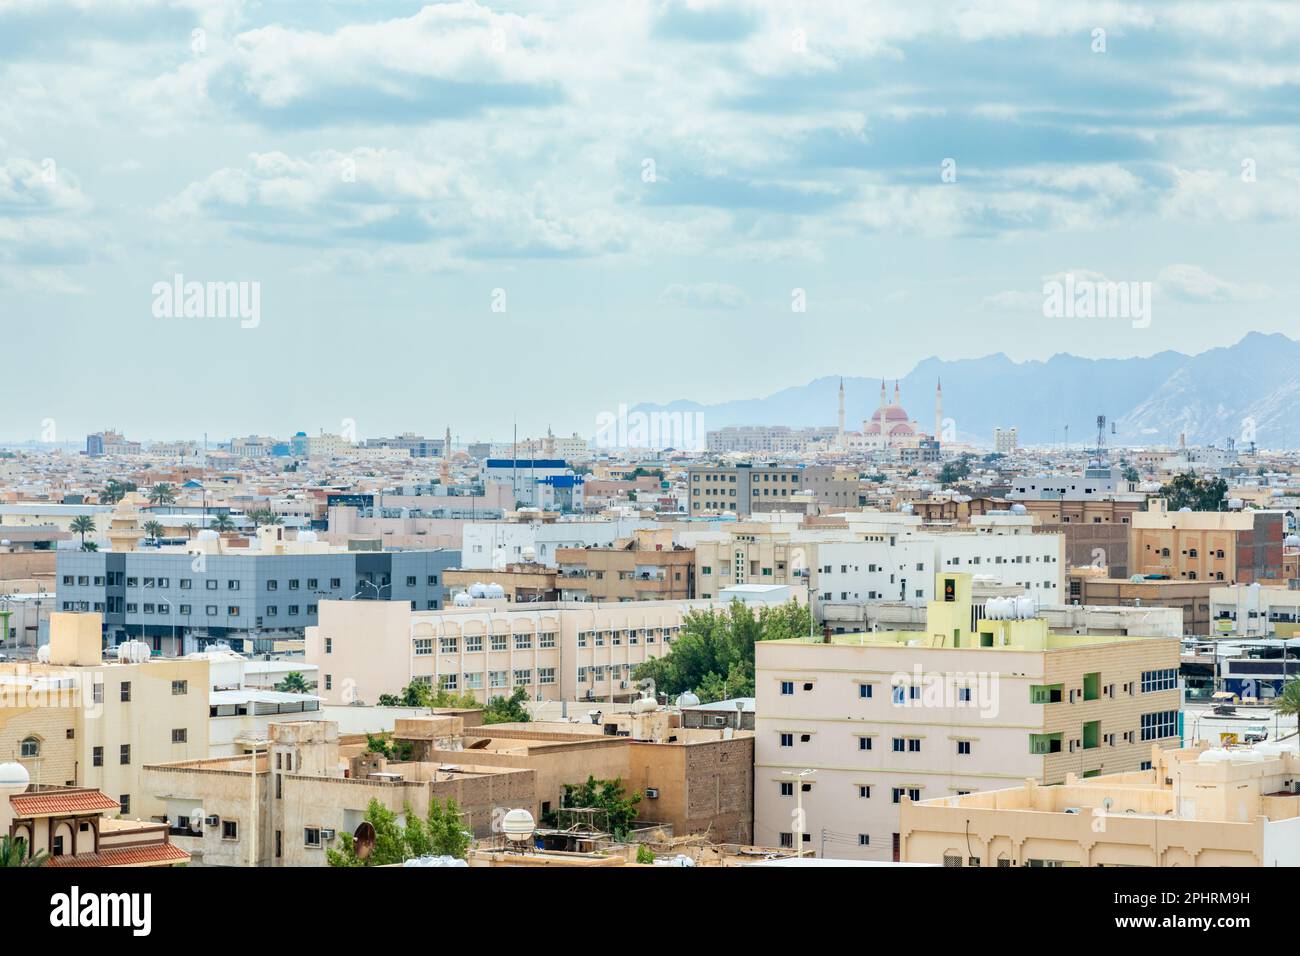 Hail city downtown with mountains in the background, Hail, Saudi Arabia Stock Photo